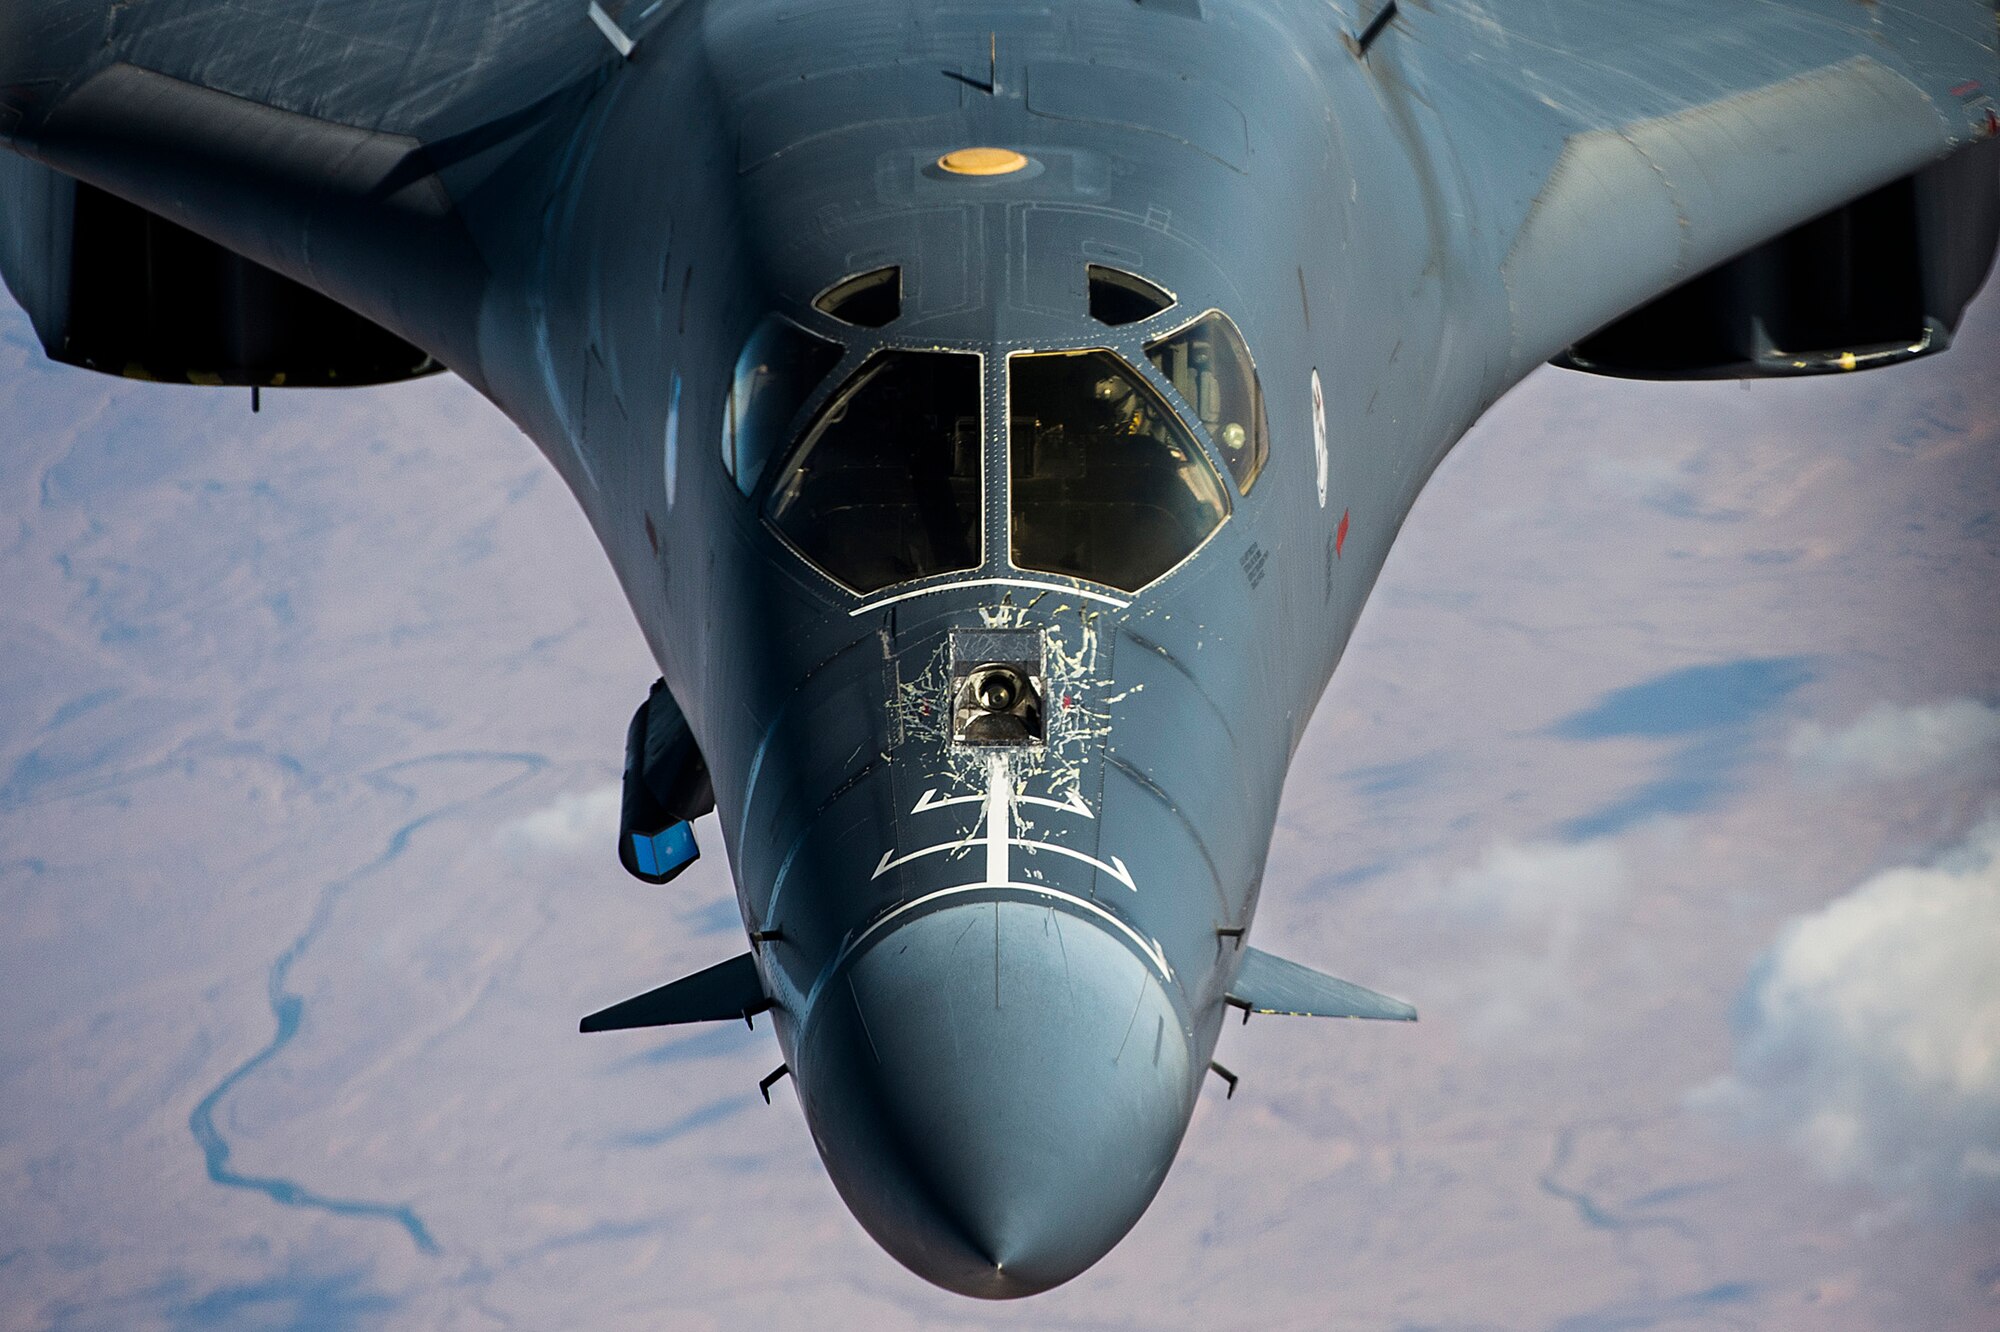 A B-1 bomber assigned to the 37th Expeditionary Bomb Squadron flies over Iraq in support of Operation Inherent Resolve, Dec. 24, 2015. OIR is the coalition intervention against the Islamic State of Iraq and the Levant. (U.S. Air Force photo by Tech. Sgt. Nathan Lipscomb/Released)